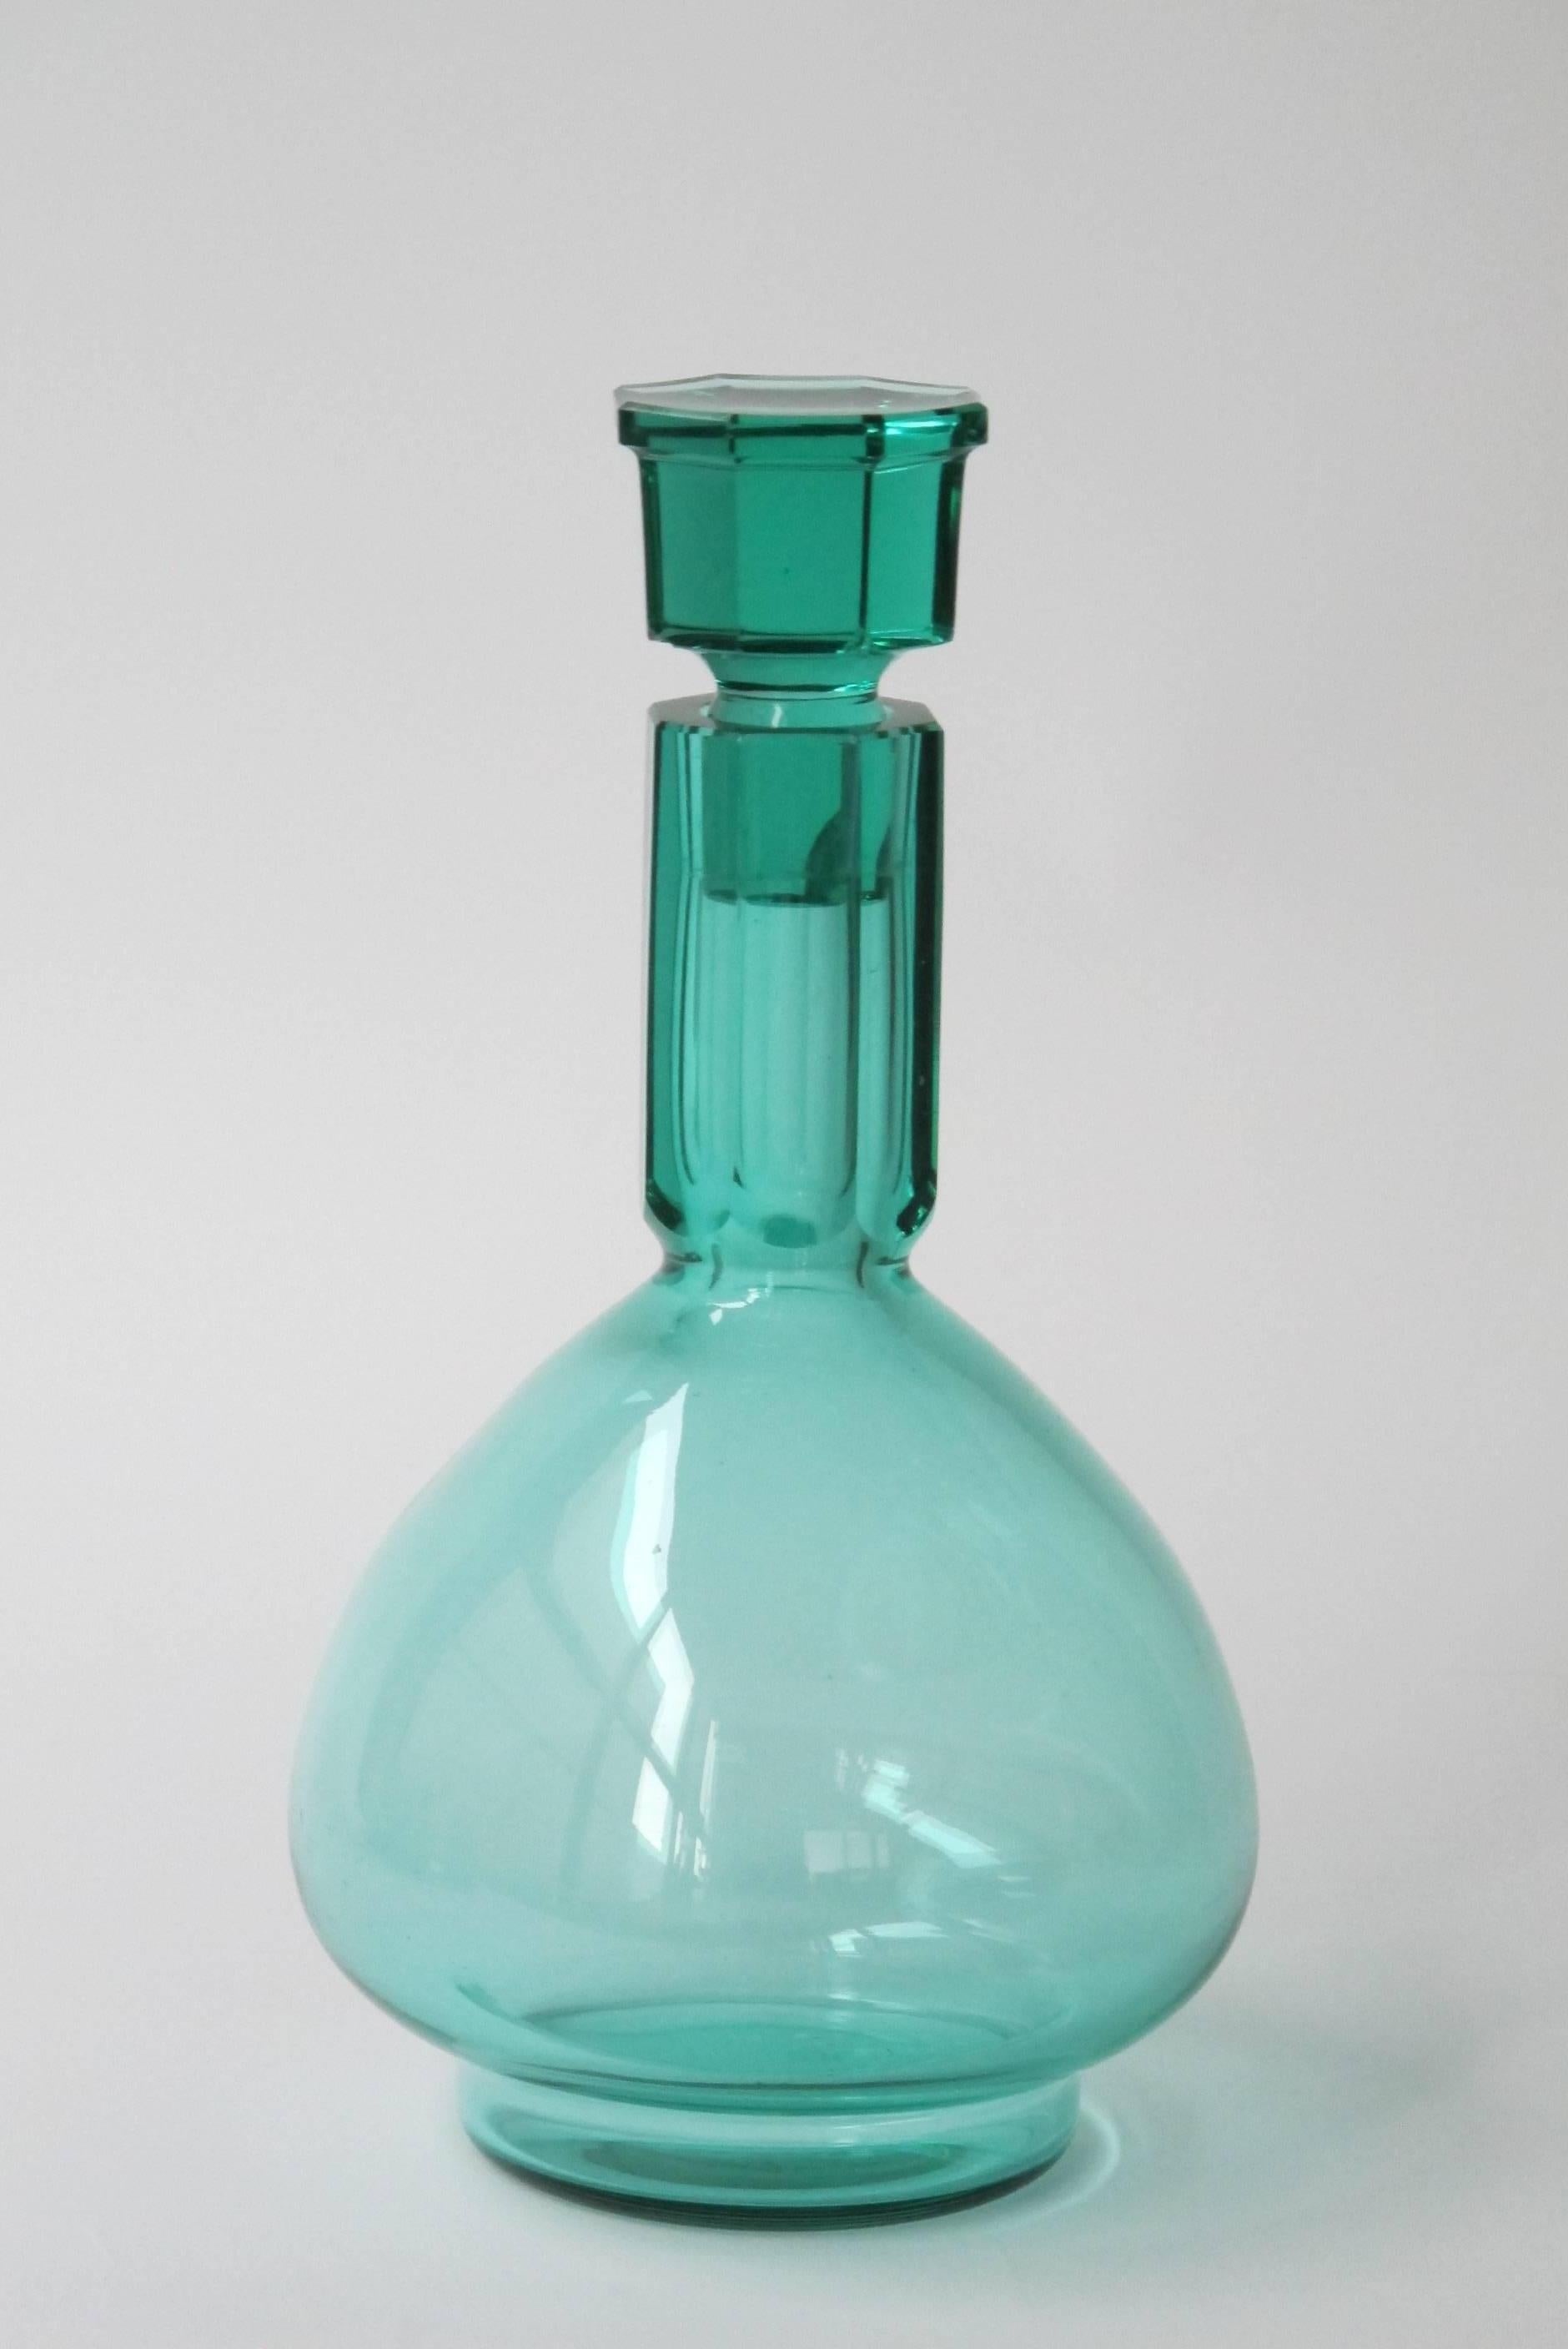 Beautiful sea-green whisky carafe set, designed by A.D. Copier for glass factory Leerdam in 1927. The offer includes a whisky carafe, six whisky beakers and a glass stand. 

The set has been collected over a couple of decades, with extreme